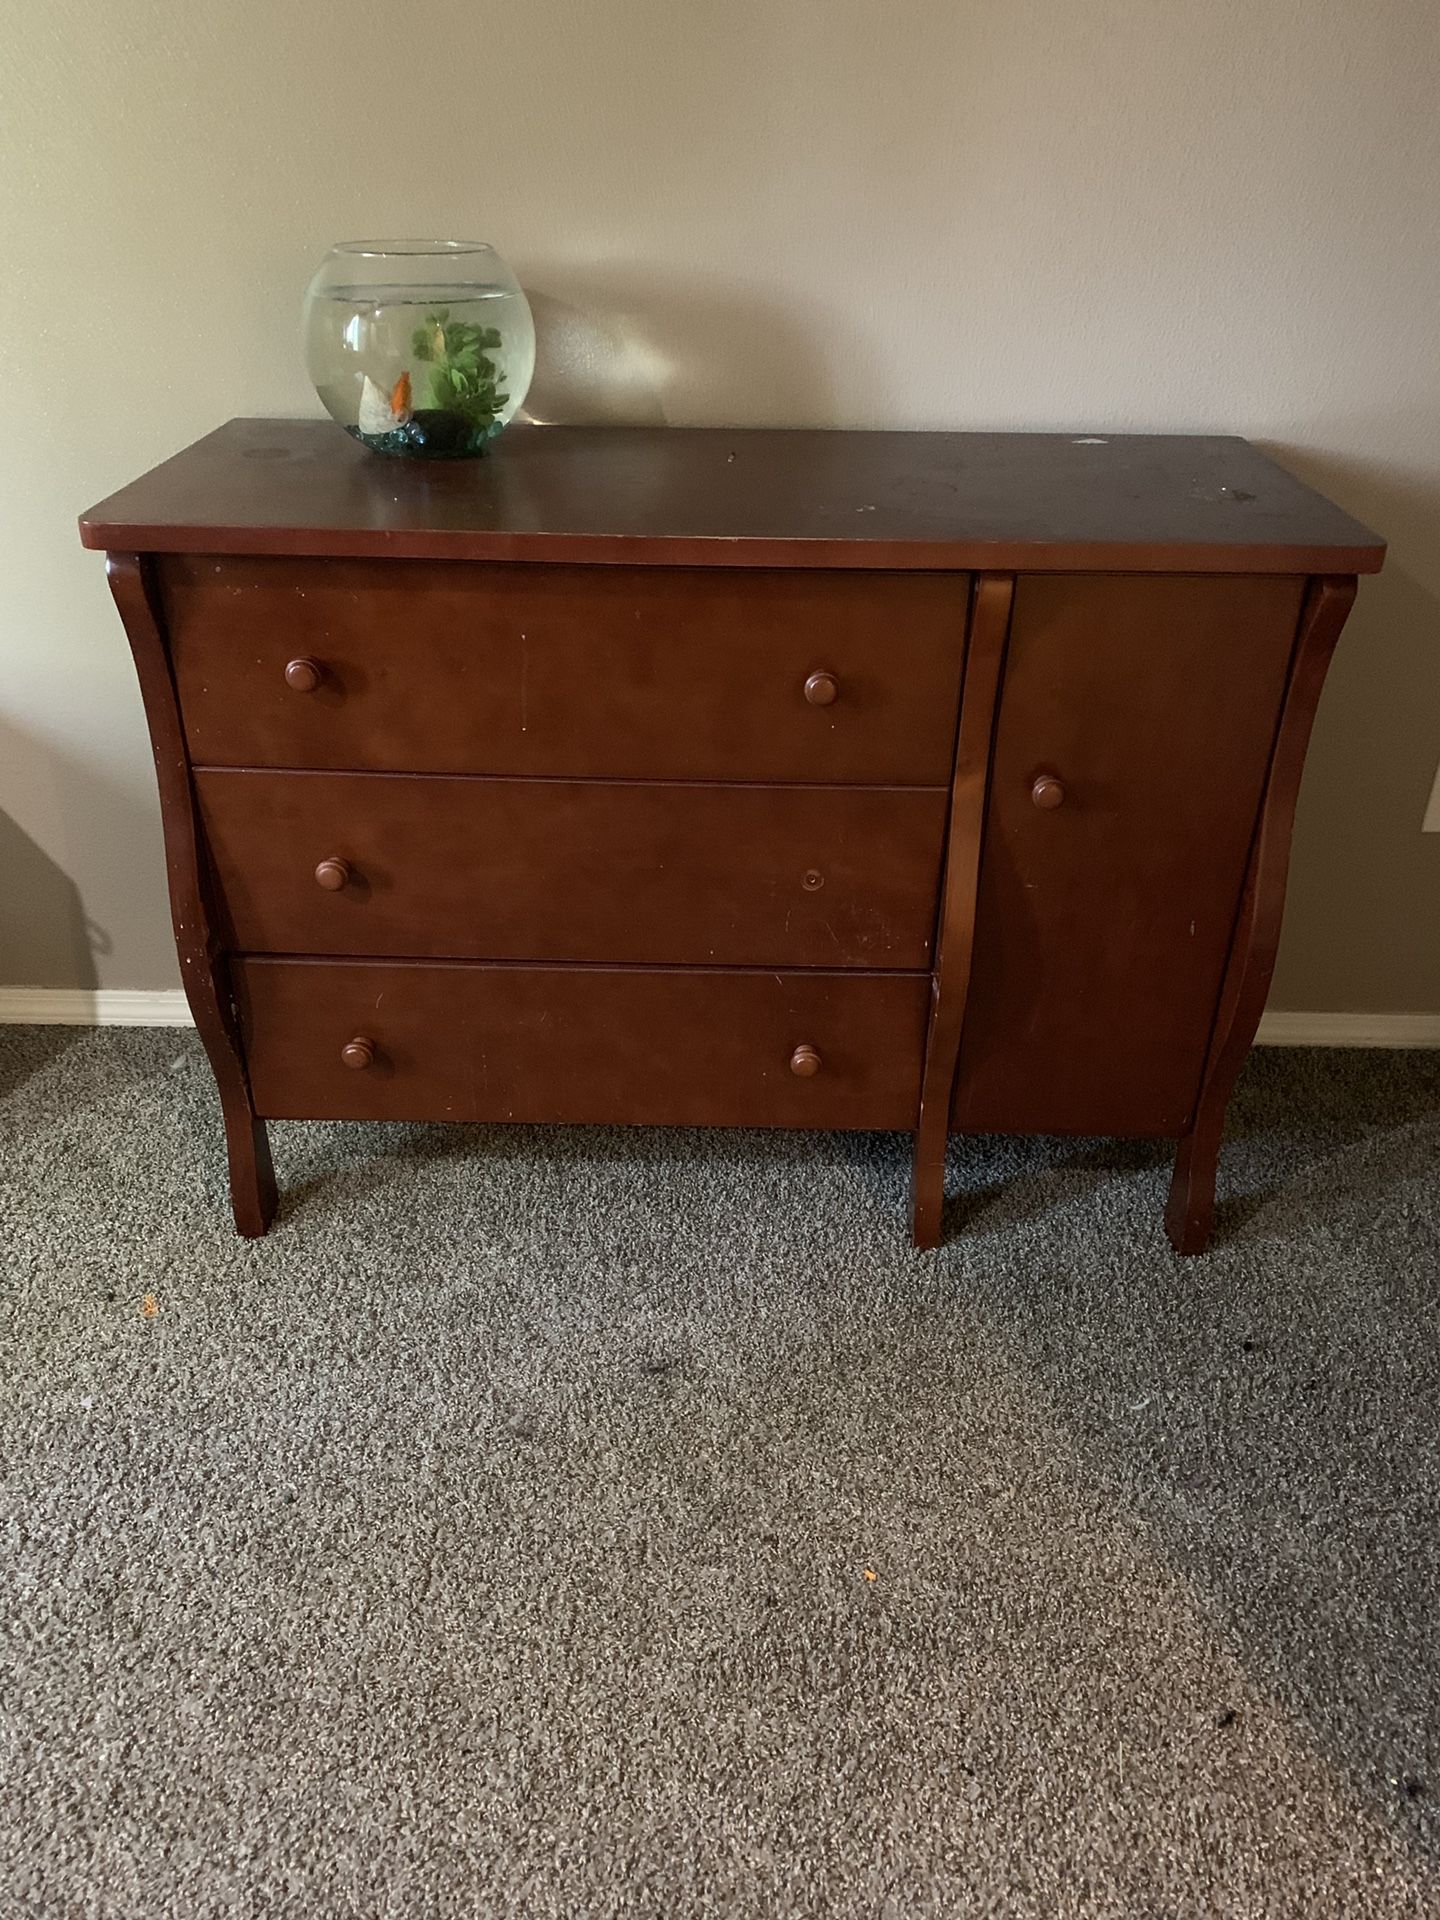 Dresser / changing table